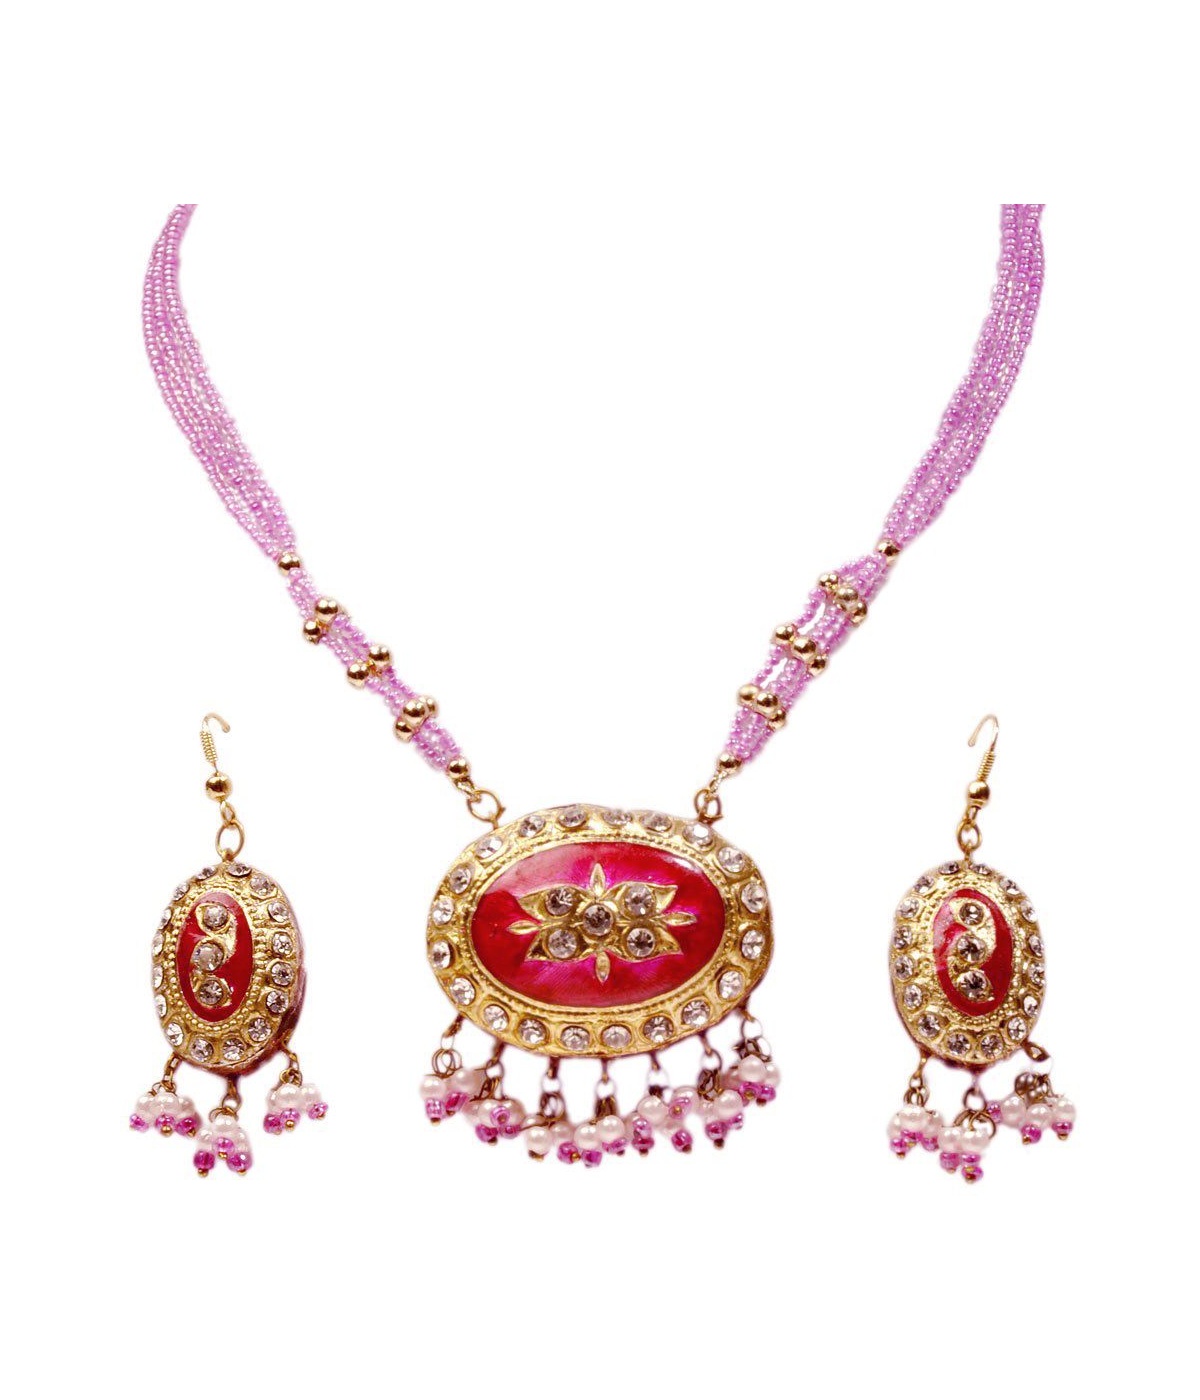  Indian Jewelry Gift Set